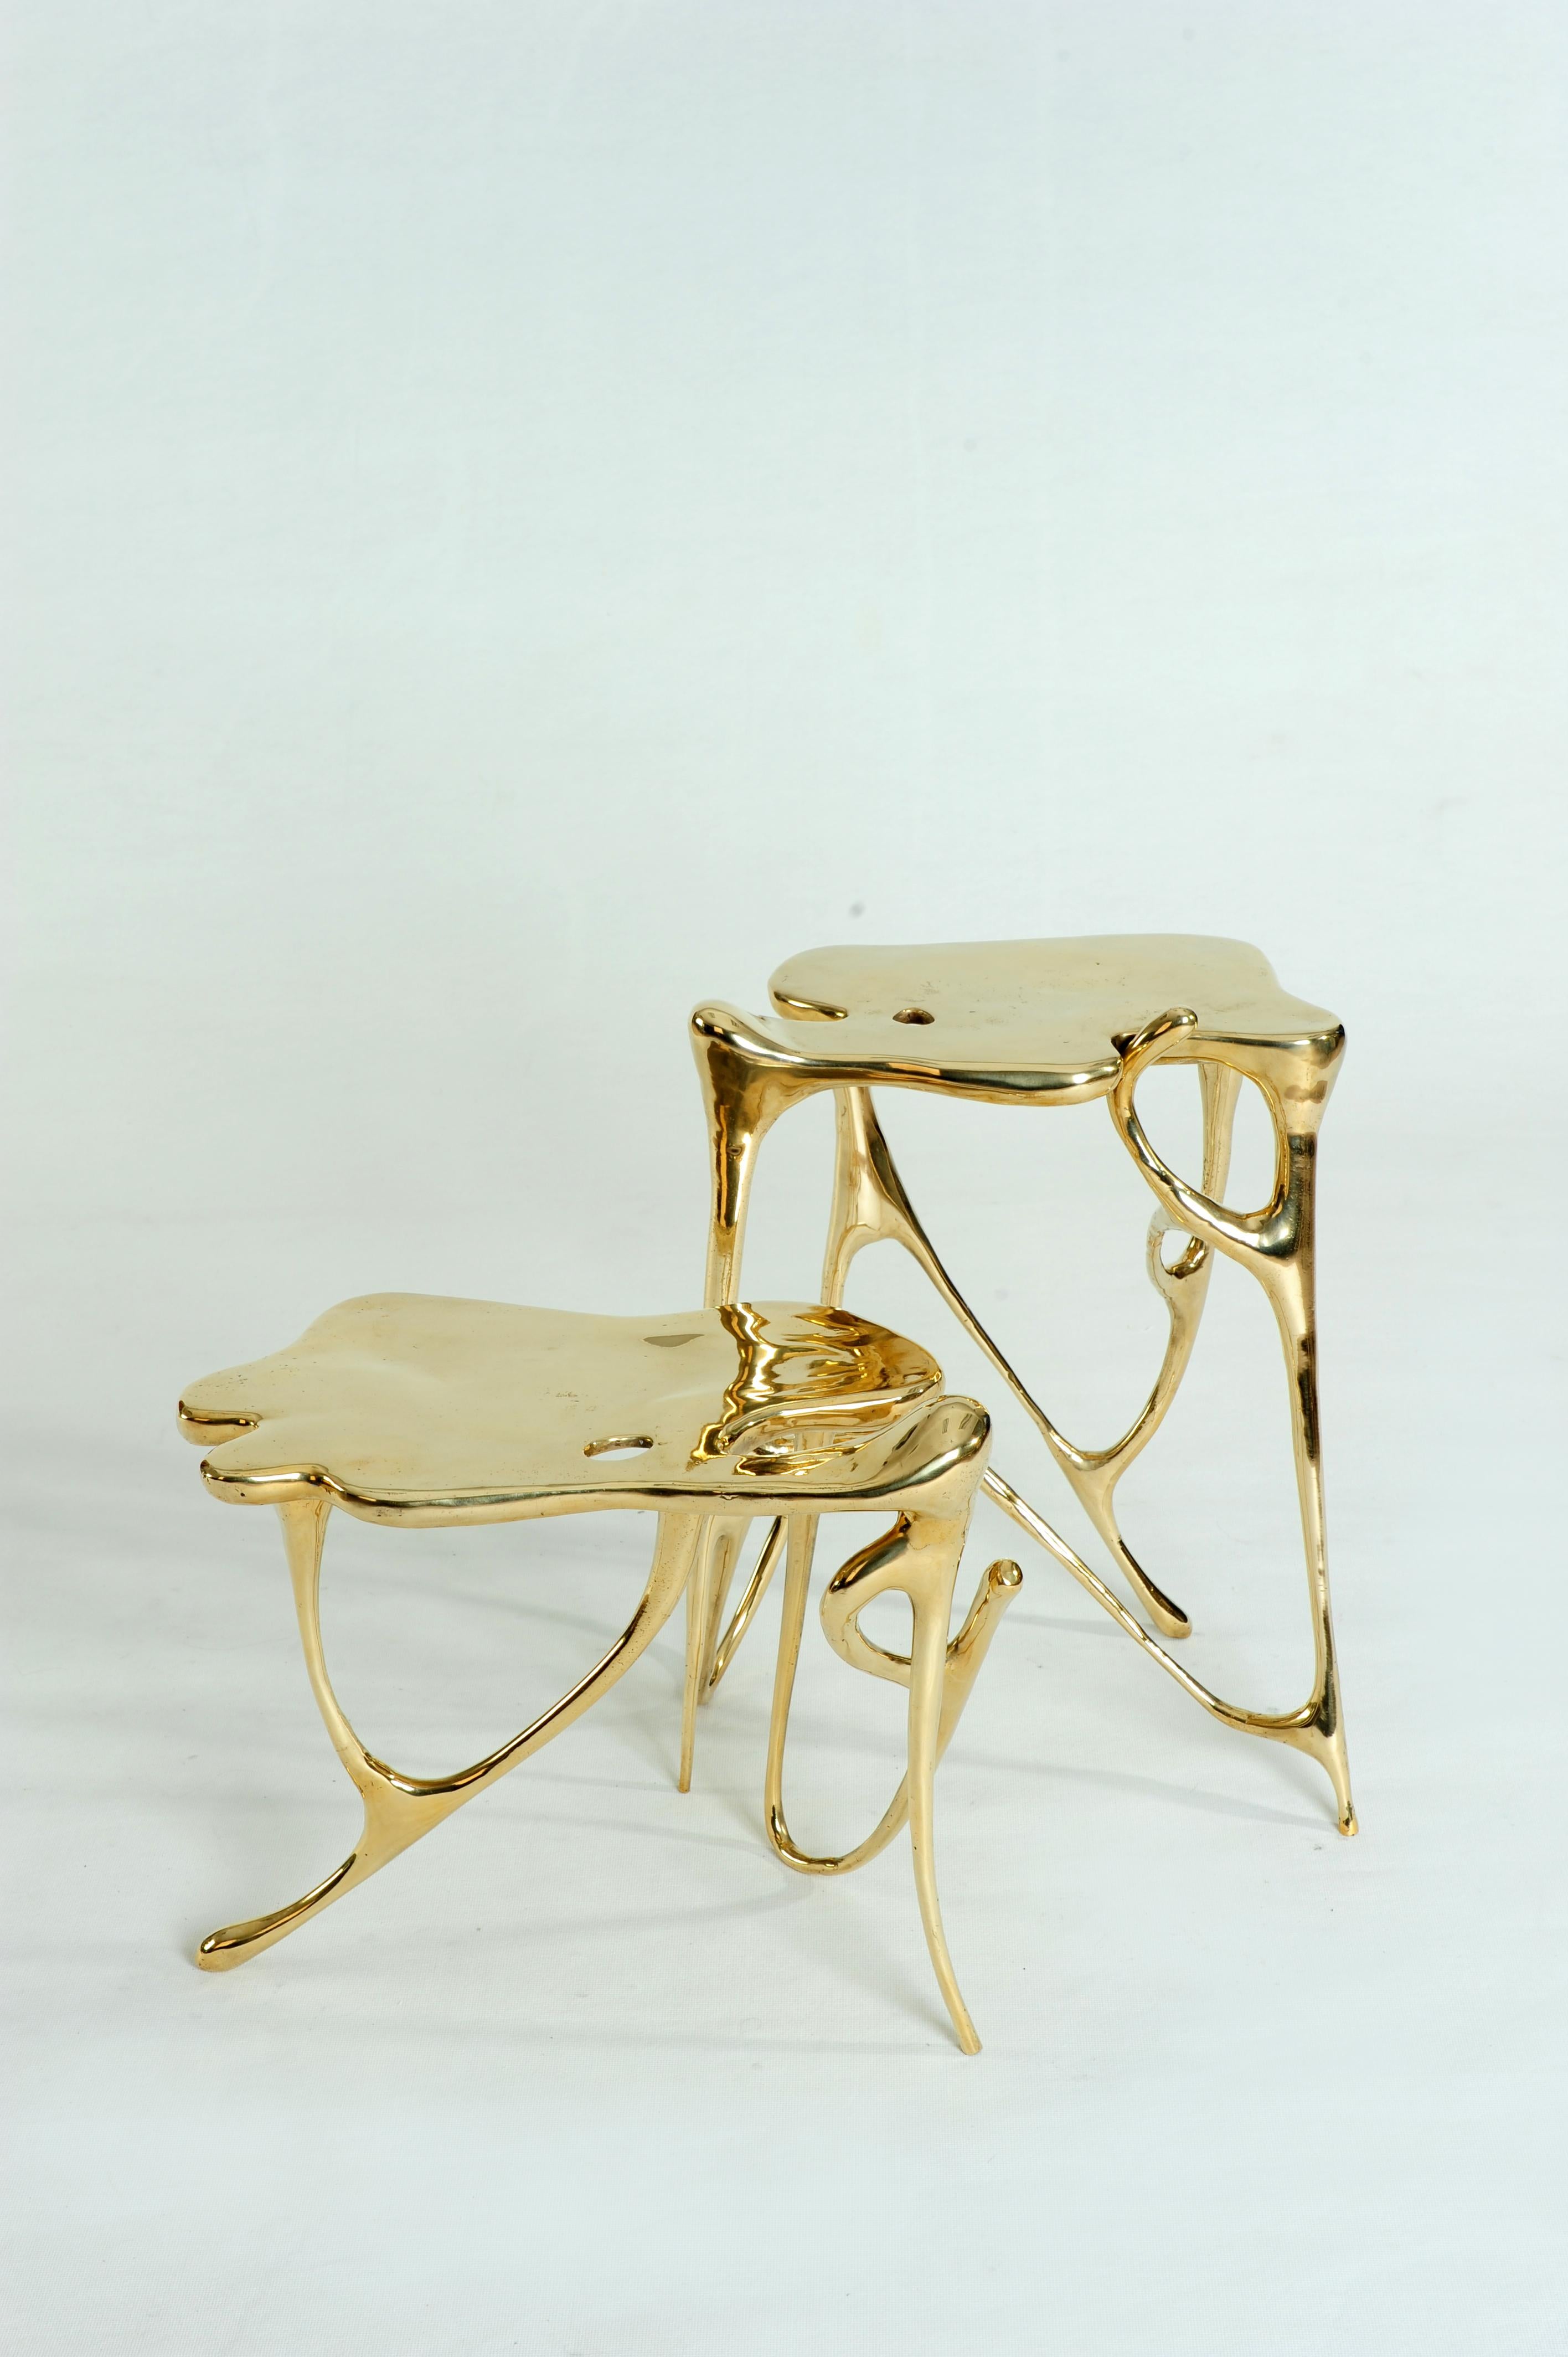 Calligraphic sculpted brass side table by Misaya
Dimensions: W 27 x L 30 x H 57 cm
Hand-sculpted brass table.

Misaya emulates Chinese ink paintings through the process of lost-wax casting.

Each piece in the Ink collection, which consists of